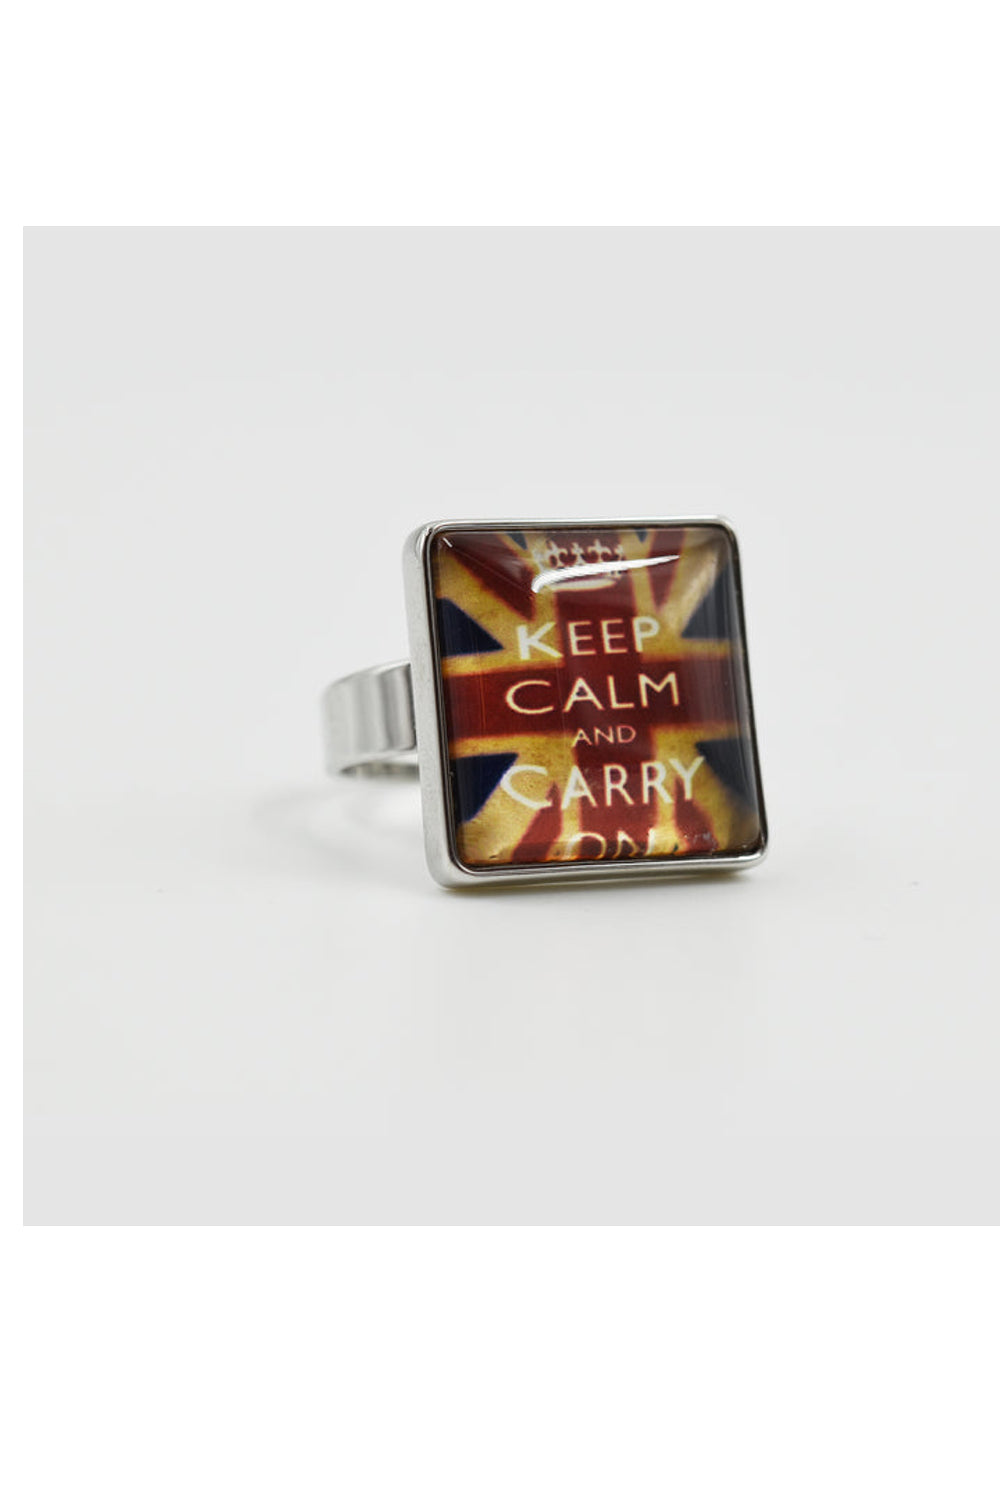 Keep_Calm _Carry_Ring_DJV_Boutique